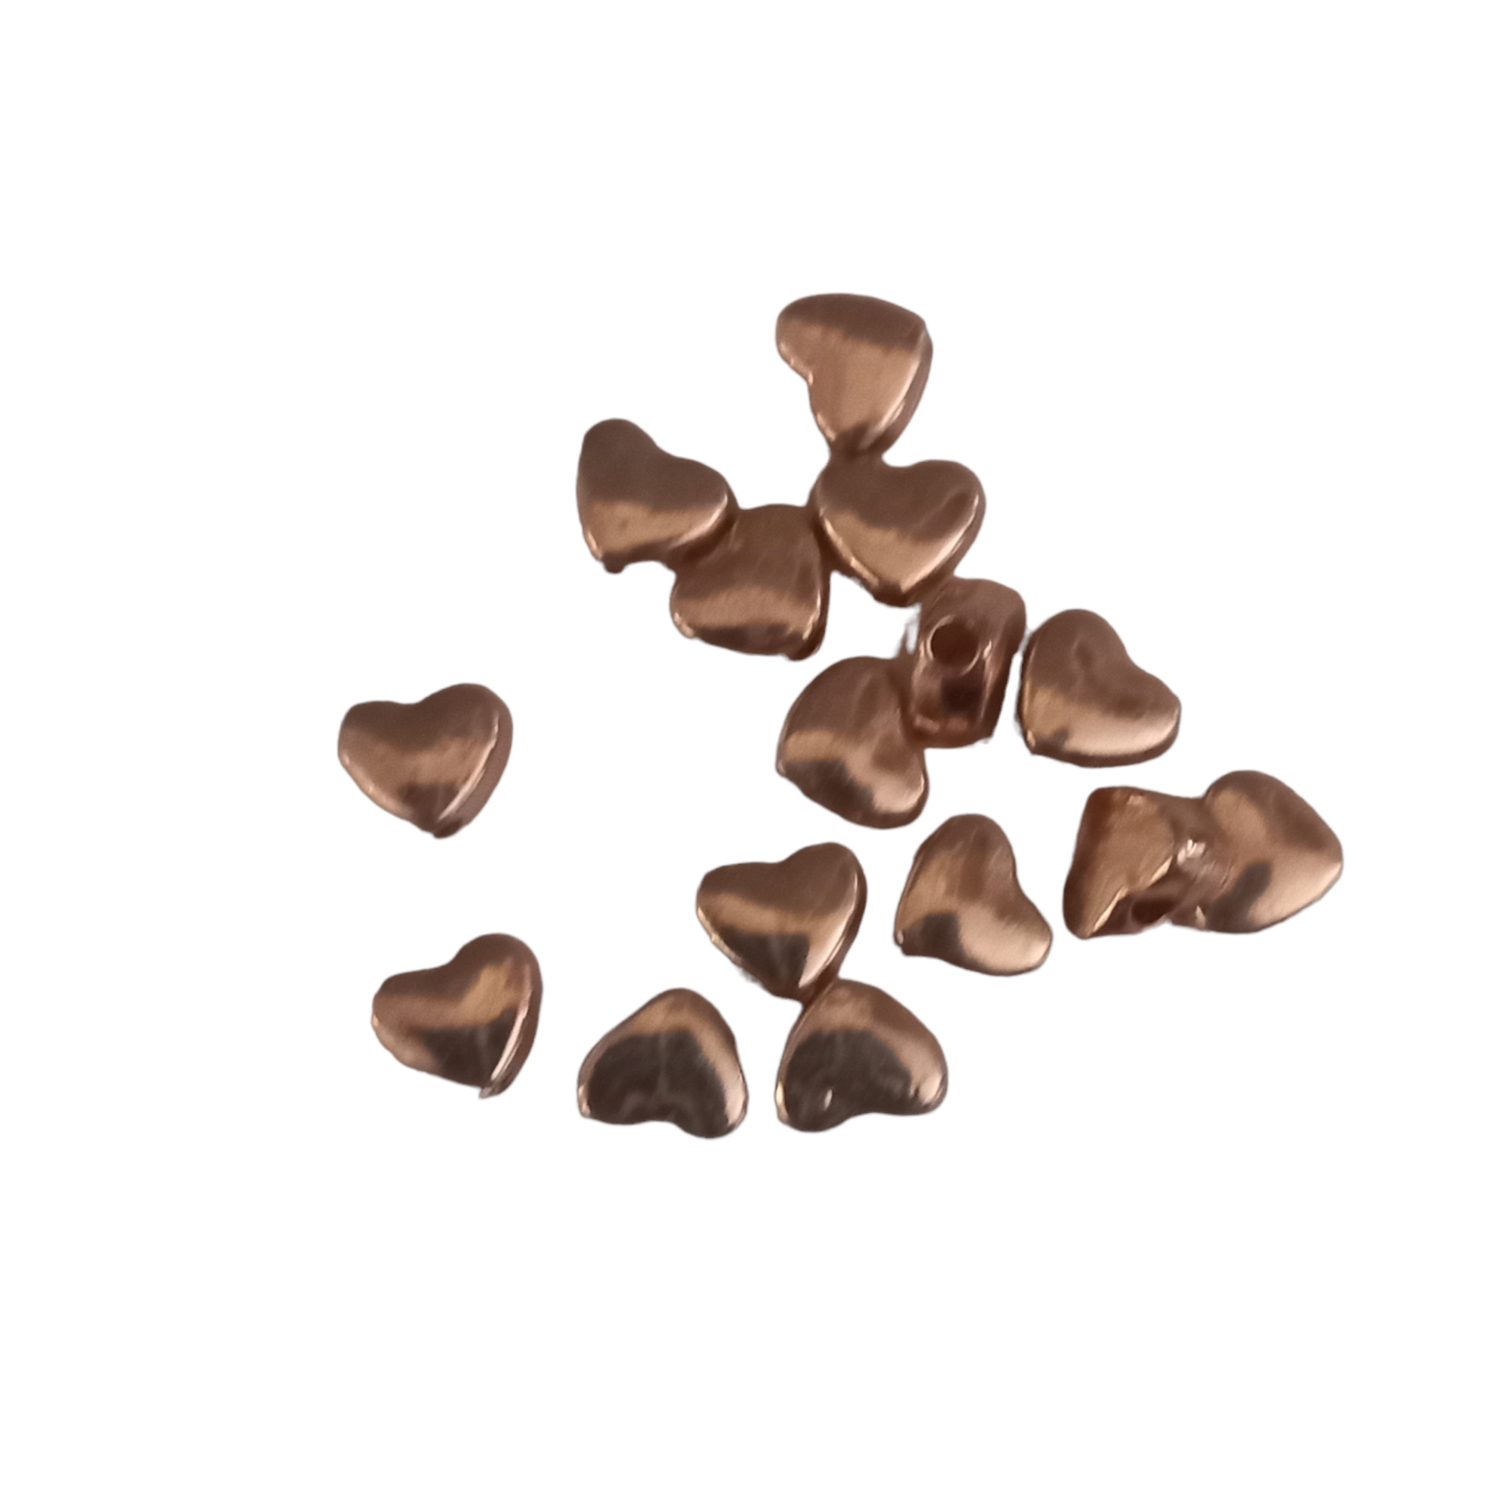  Heart kc gold Spacer (20 pieces)